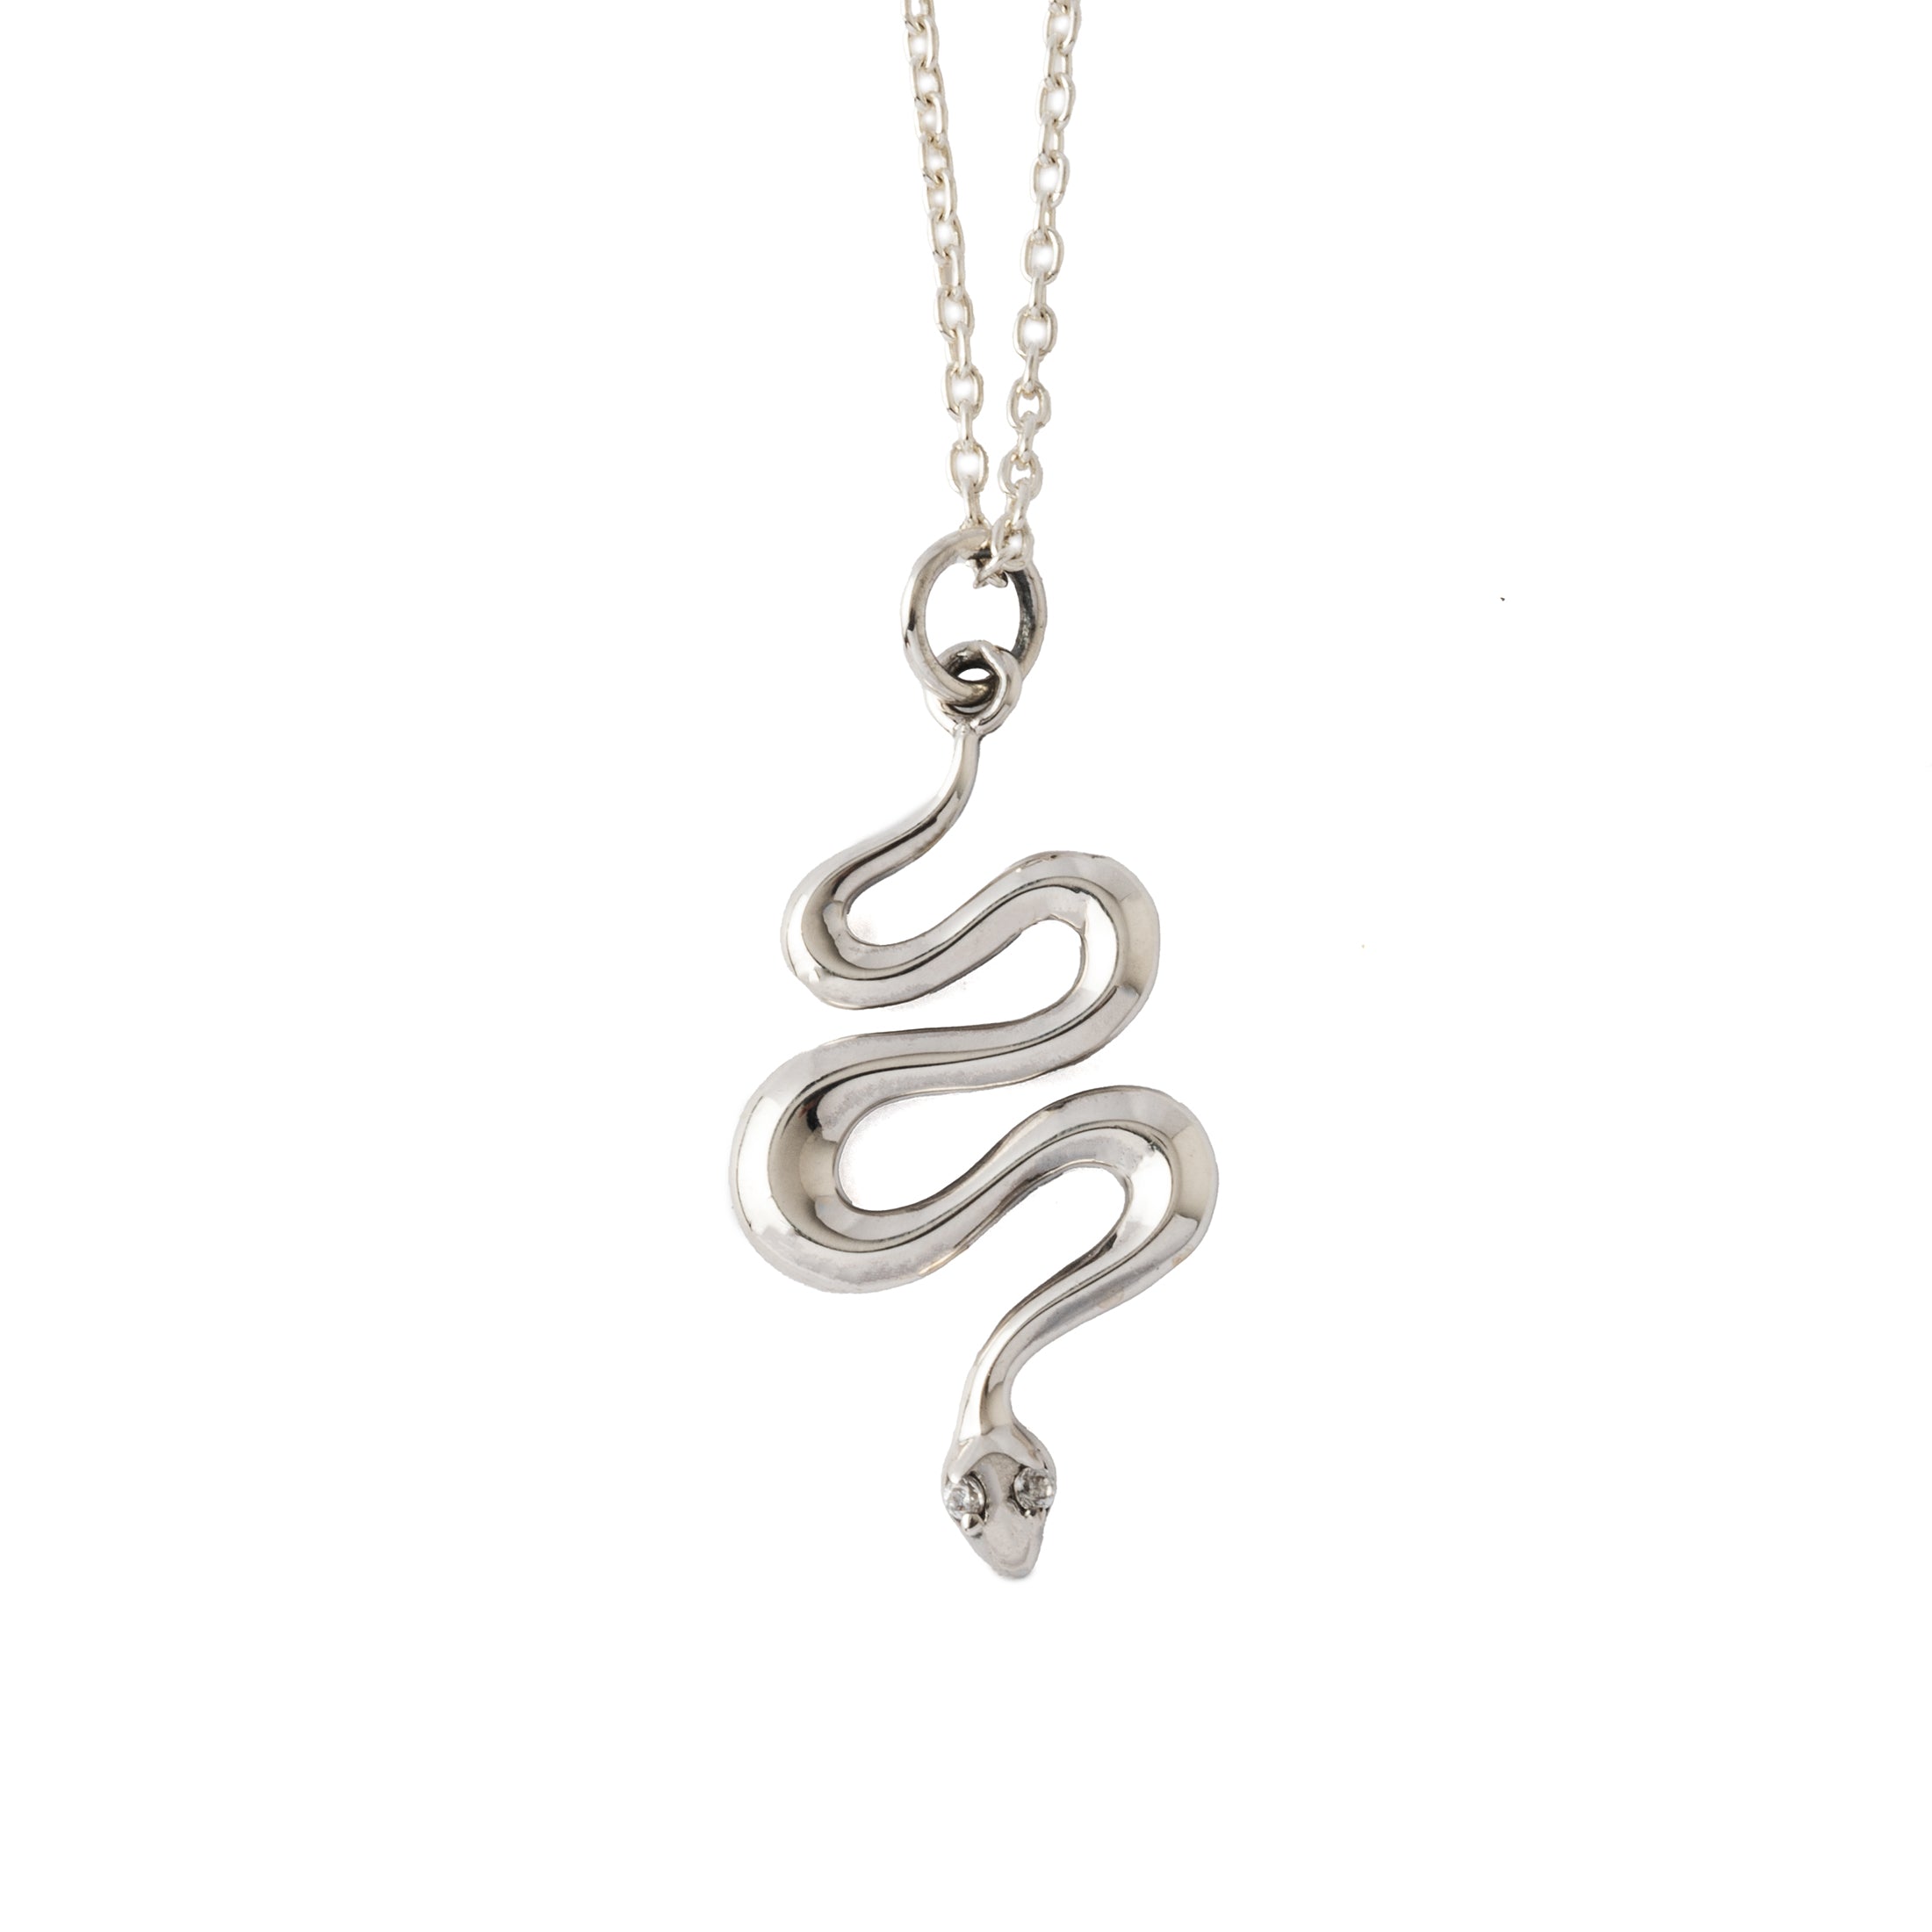 Serpent Charm Necklace frontal view